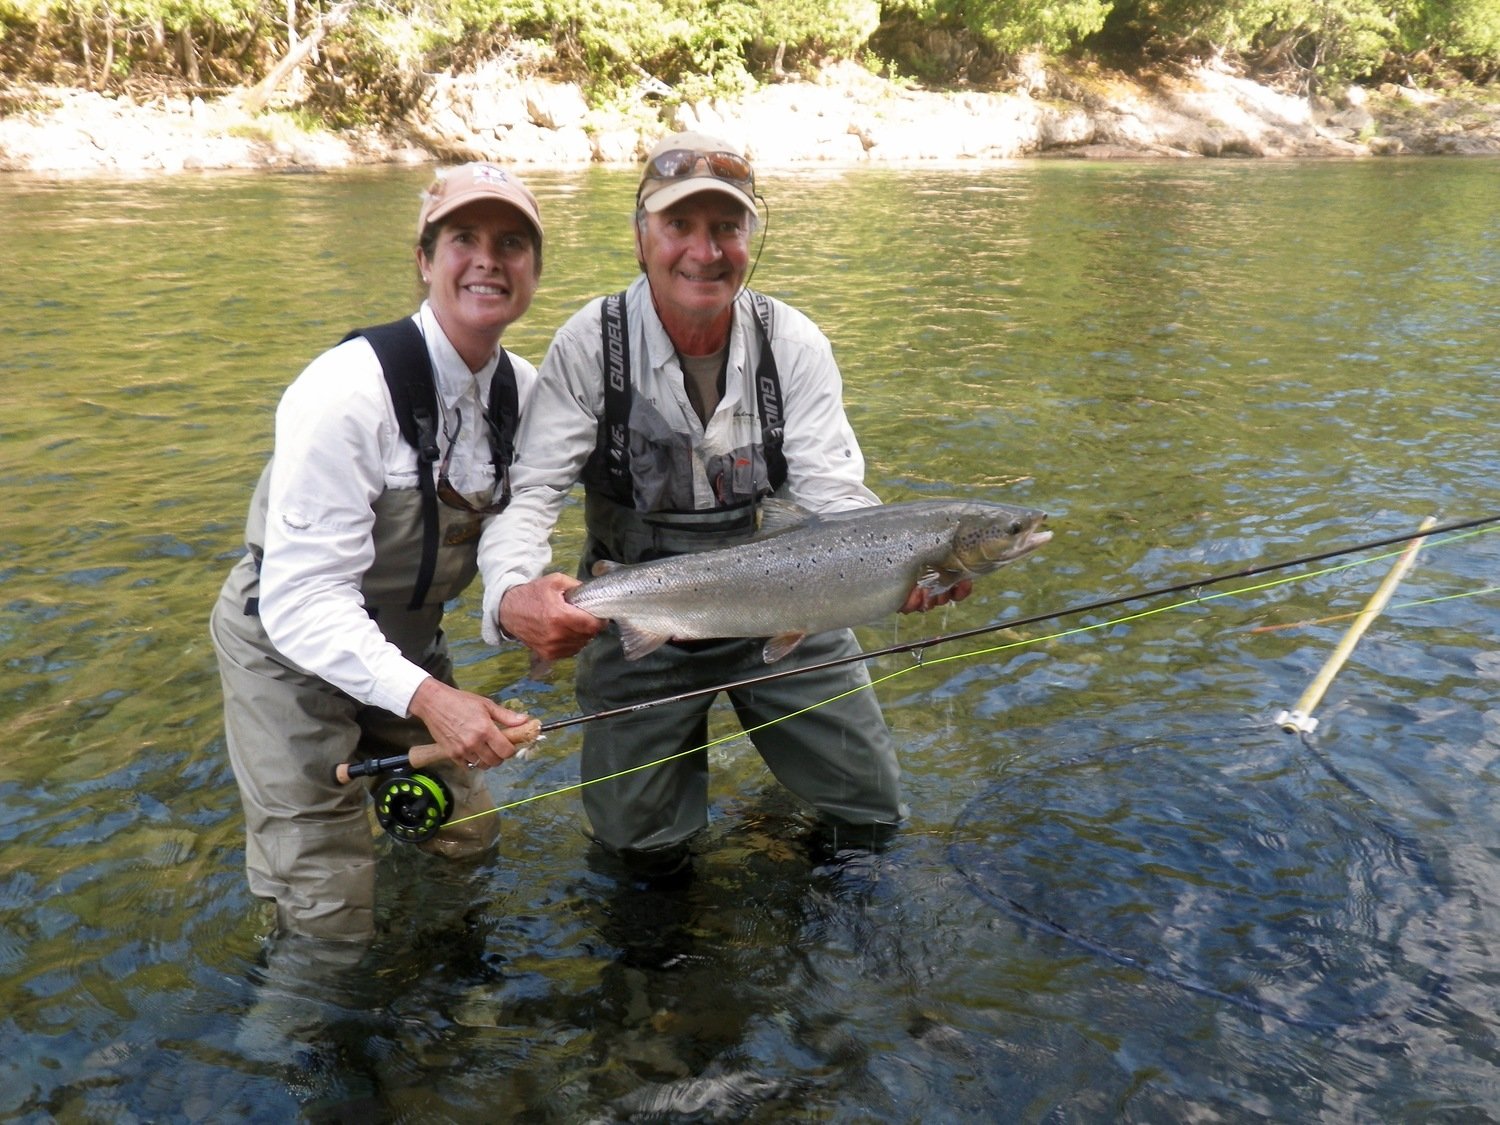 Salmon Lodge Fishing Report and the ladies always do Atlantic Salmon fishing with style. we love seeing the increase in female anglers. Many more are welcome.